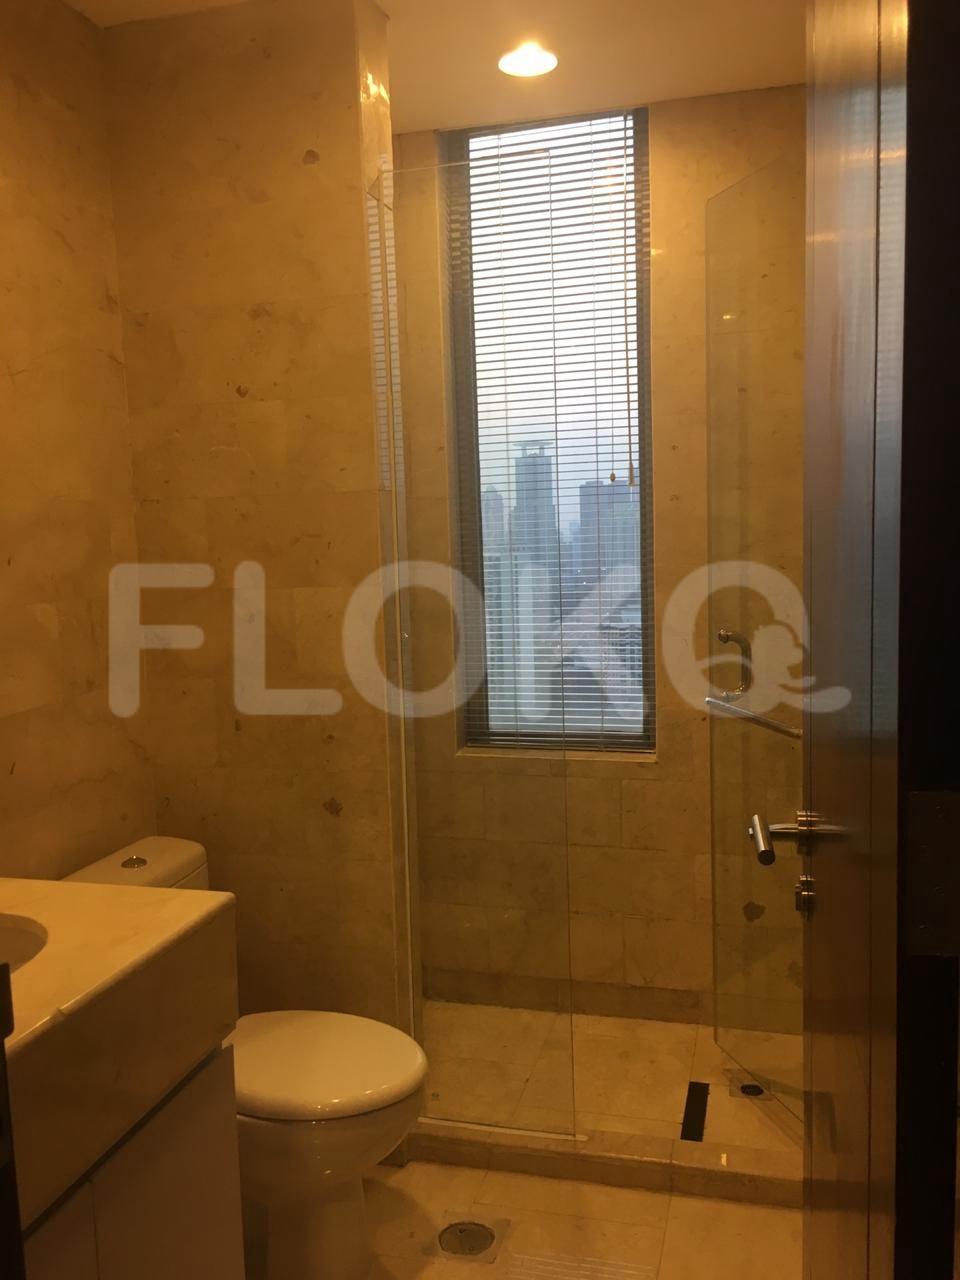 2 Bedroom on 37th Floor fku32a for Rent in The Grove Apartment